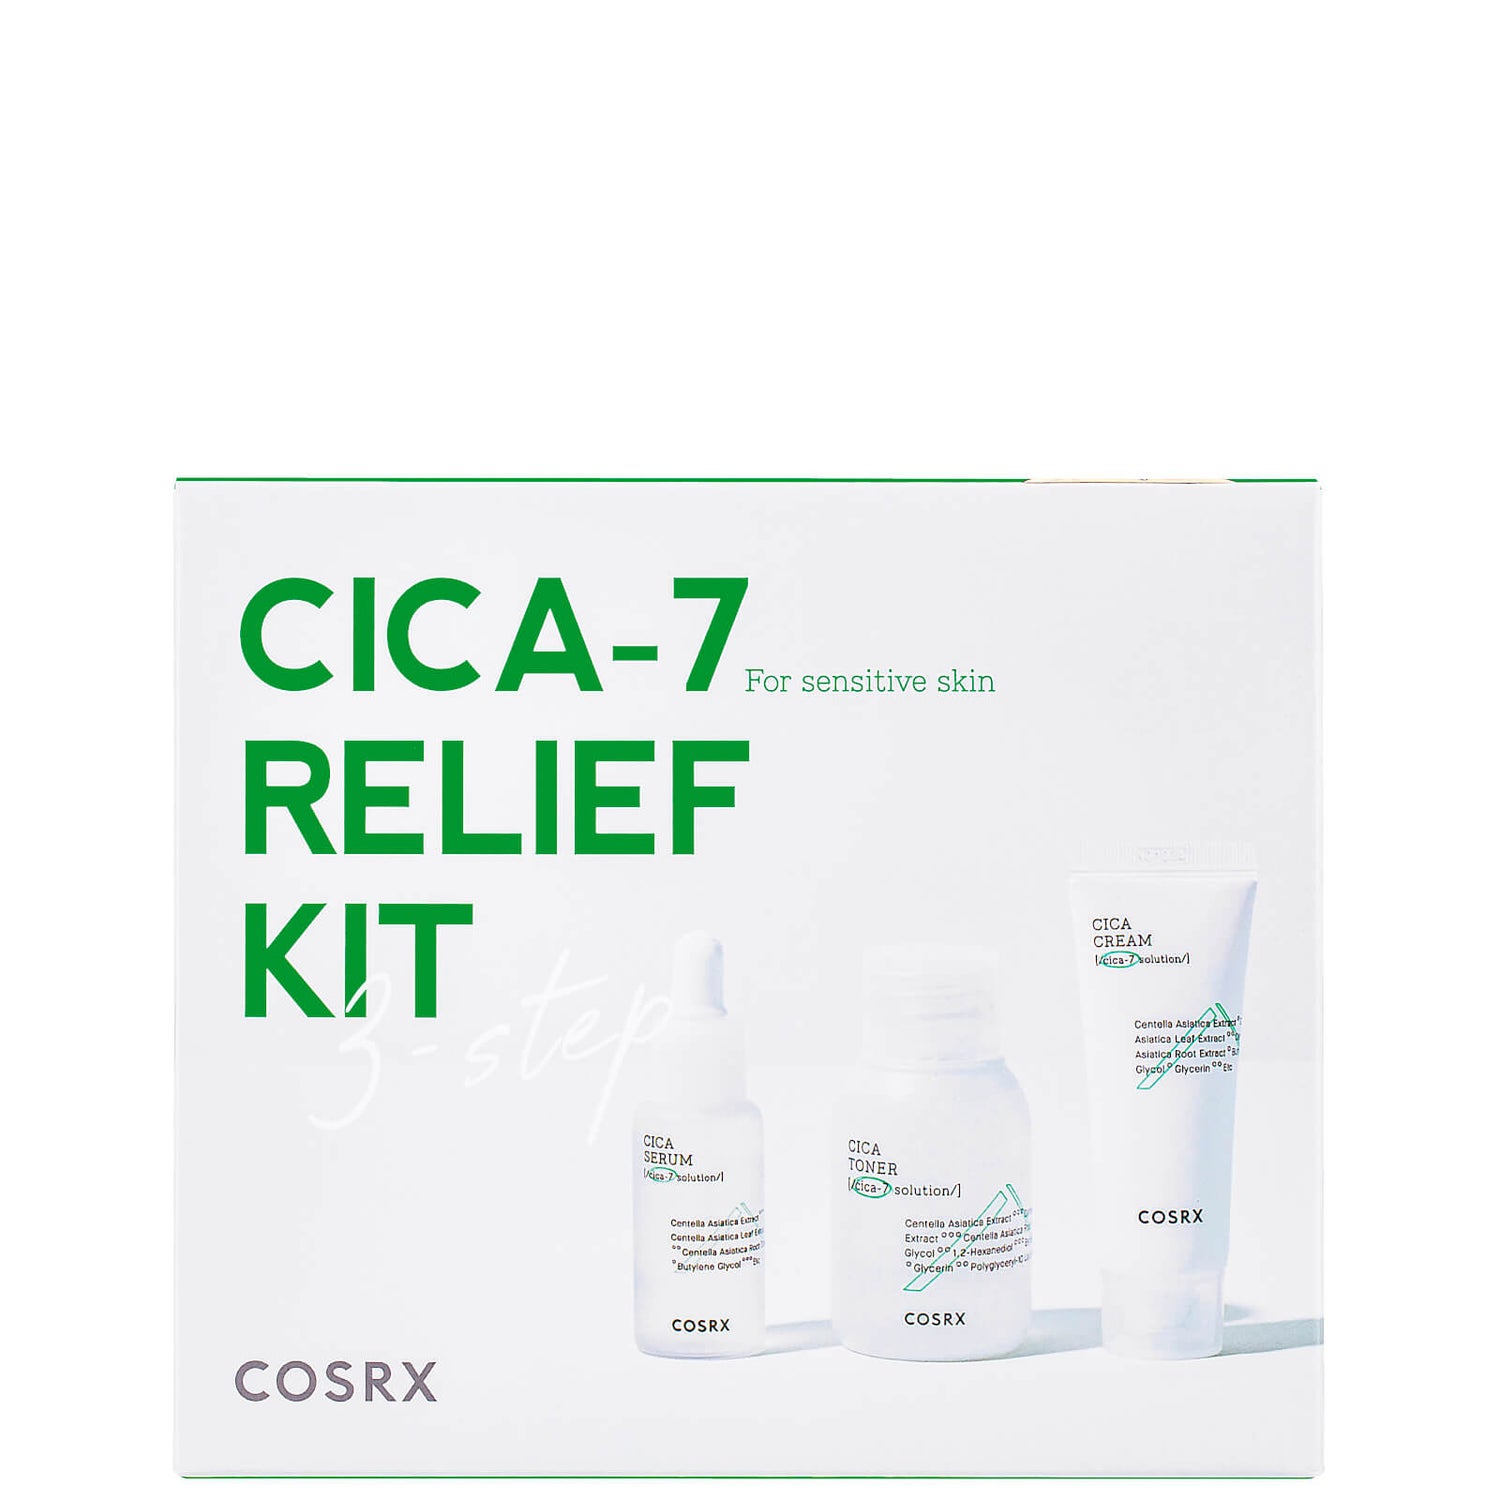 CICA-7 Relief Kit